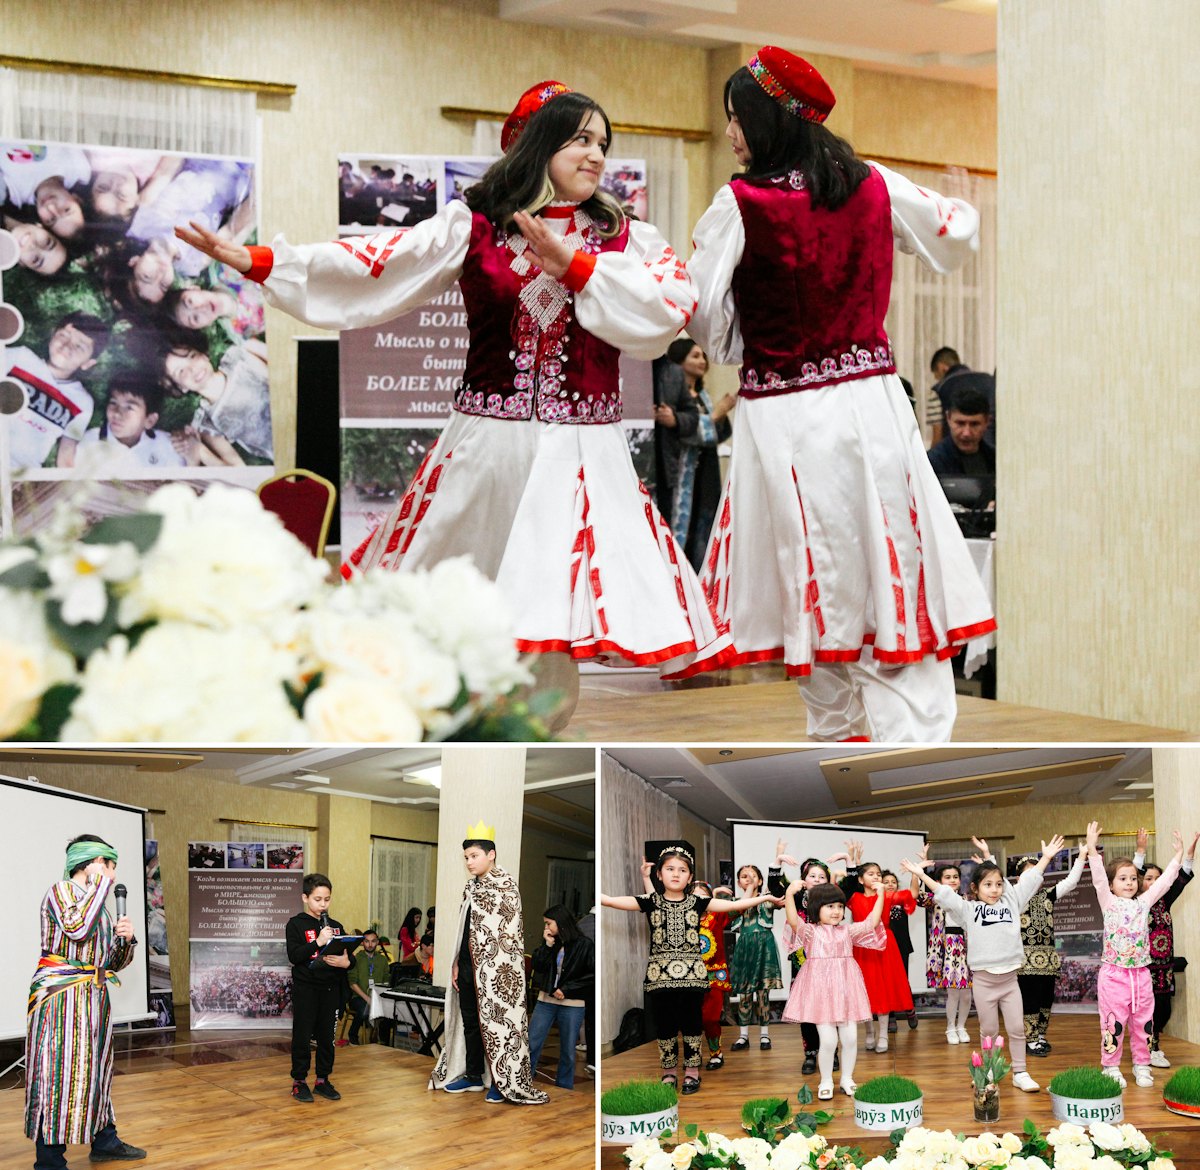 At this conference in Khujand, Tajikistan, traditional dance and theatrical presentations contributed to the joyful atmosphere of the gathering.